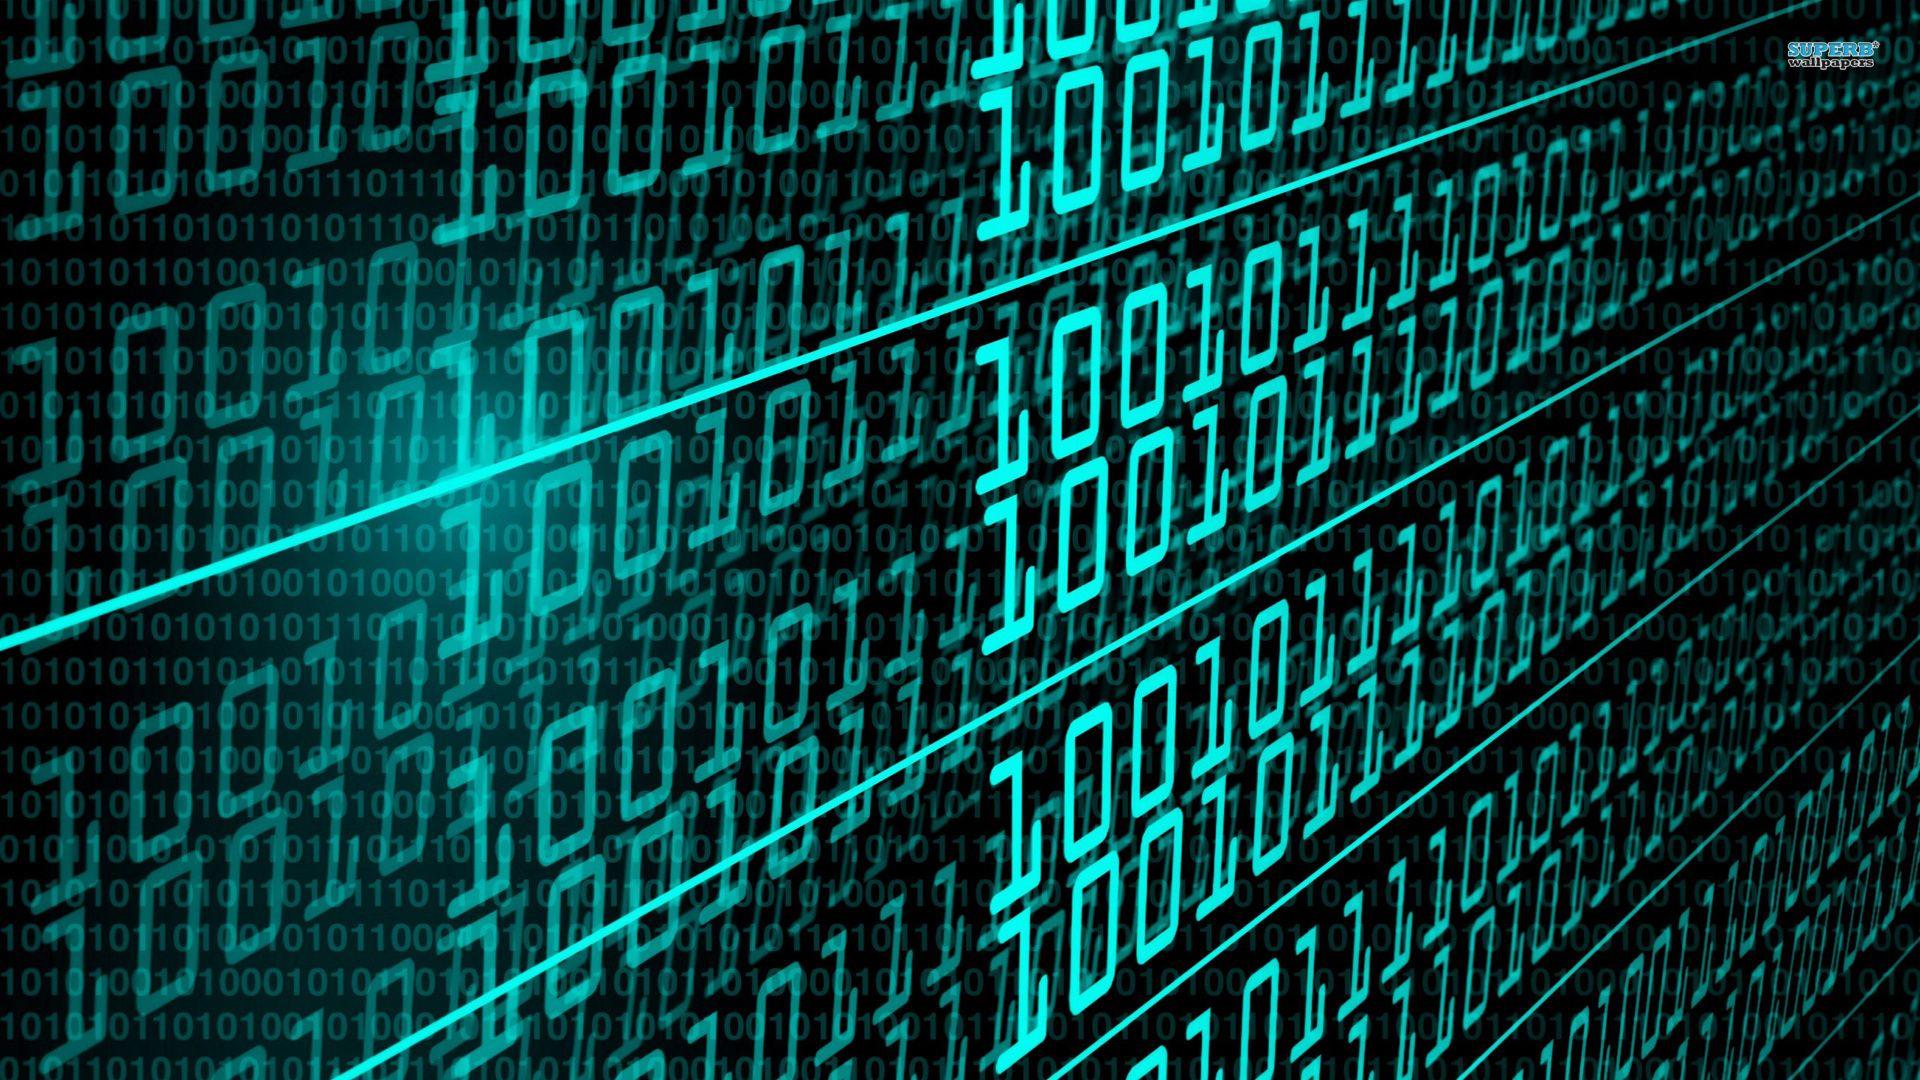 World information technology background image with binary code